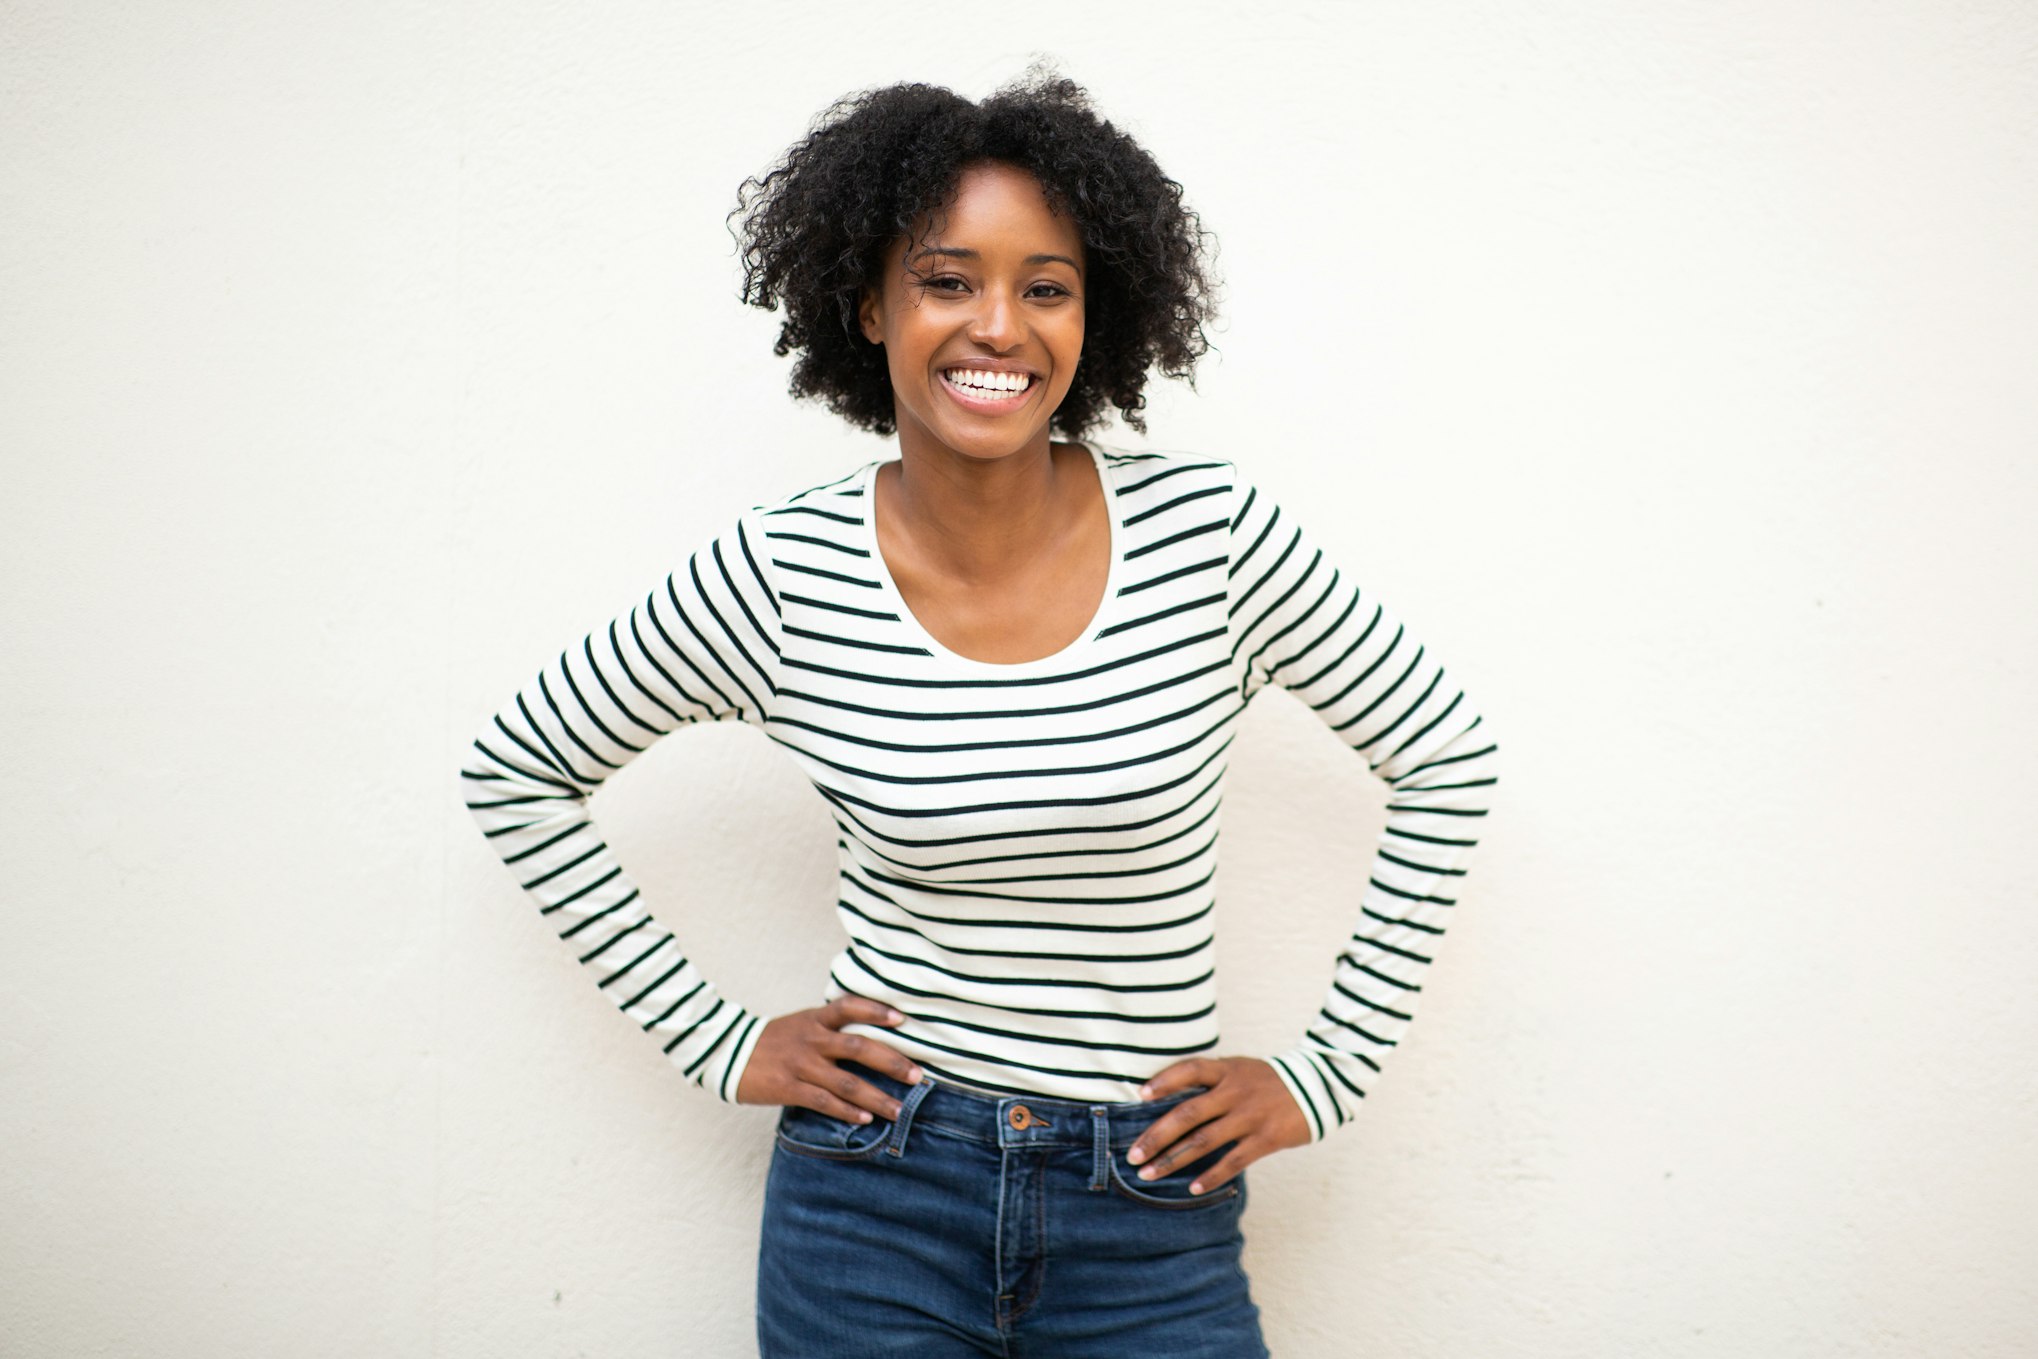 Woman in stripped shirt with hands on hips smiling